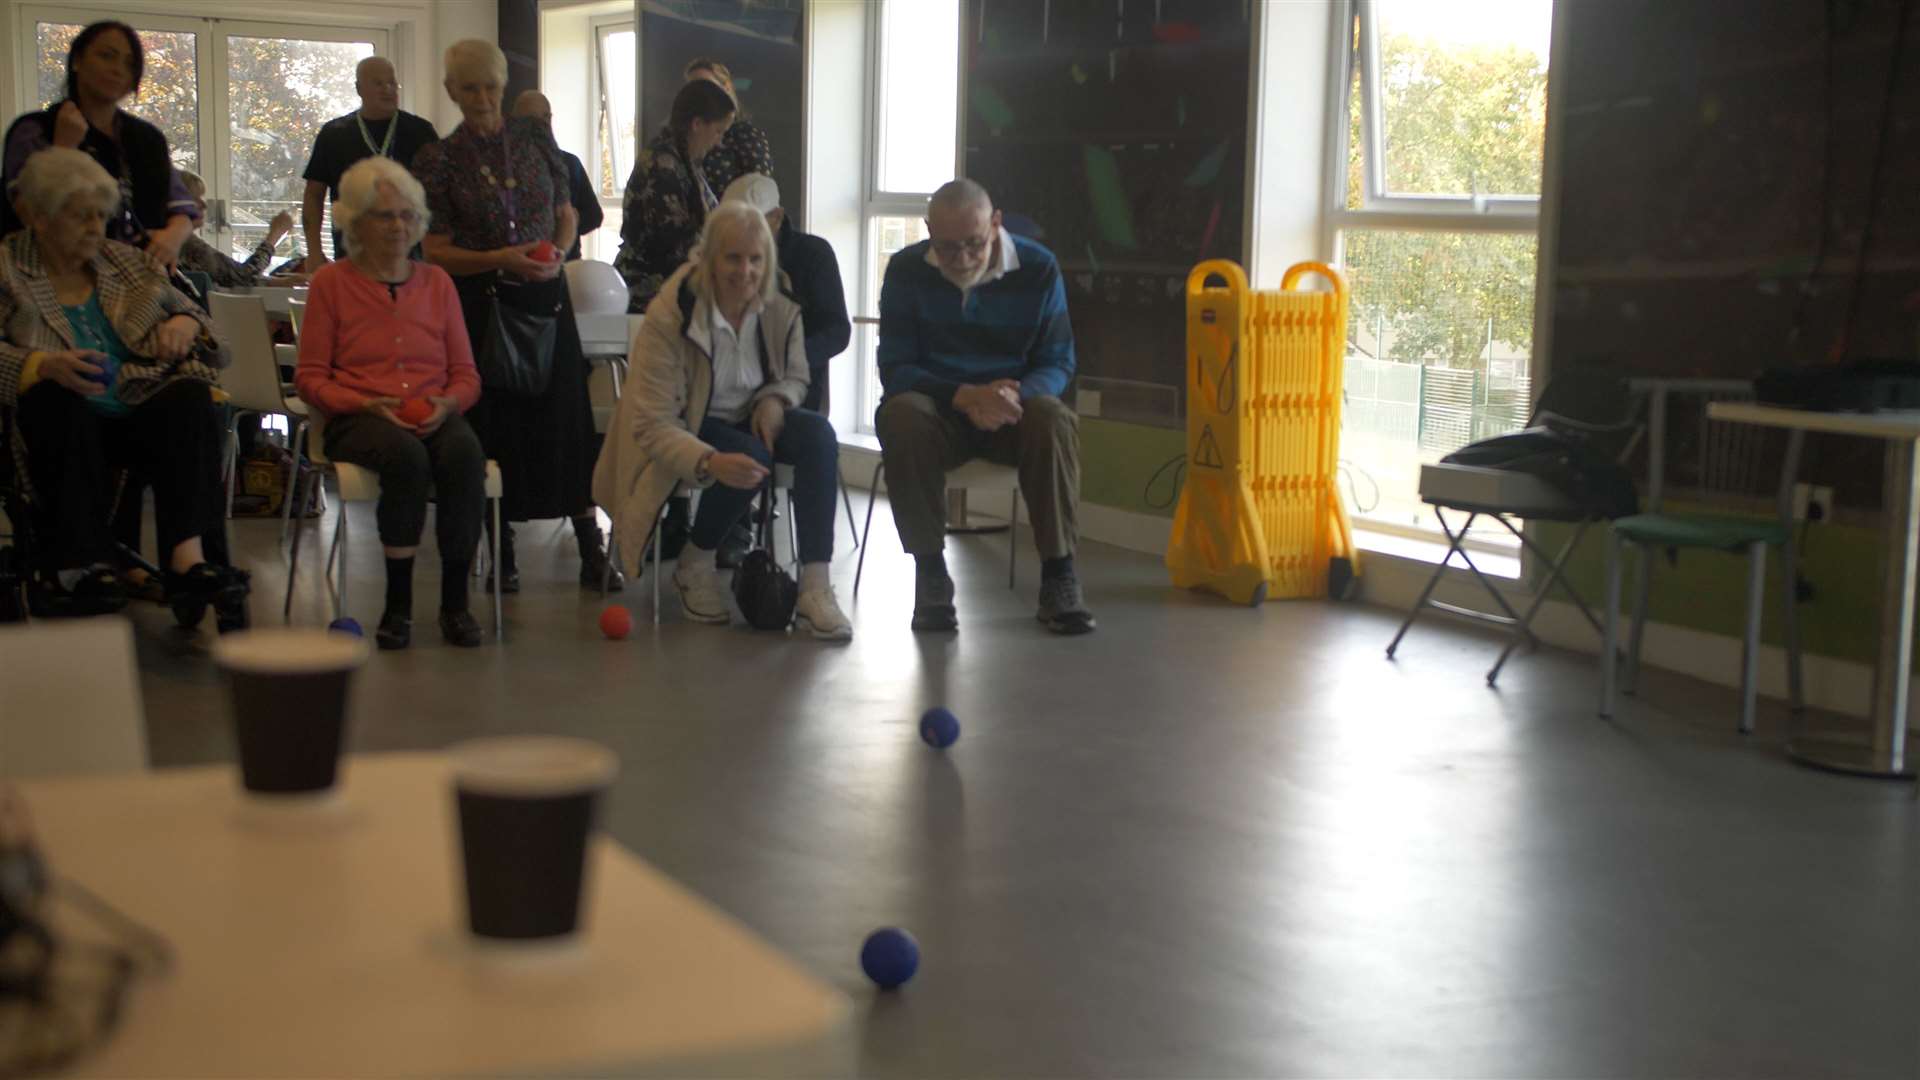 The group playing bowls